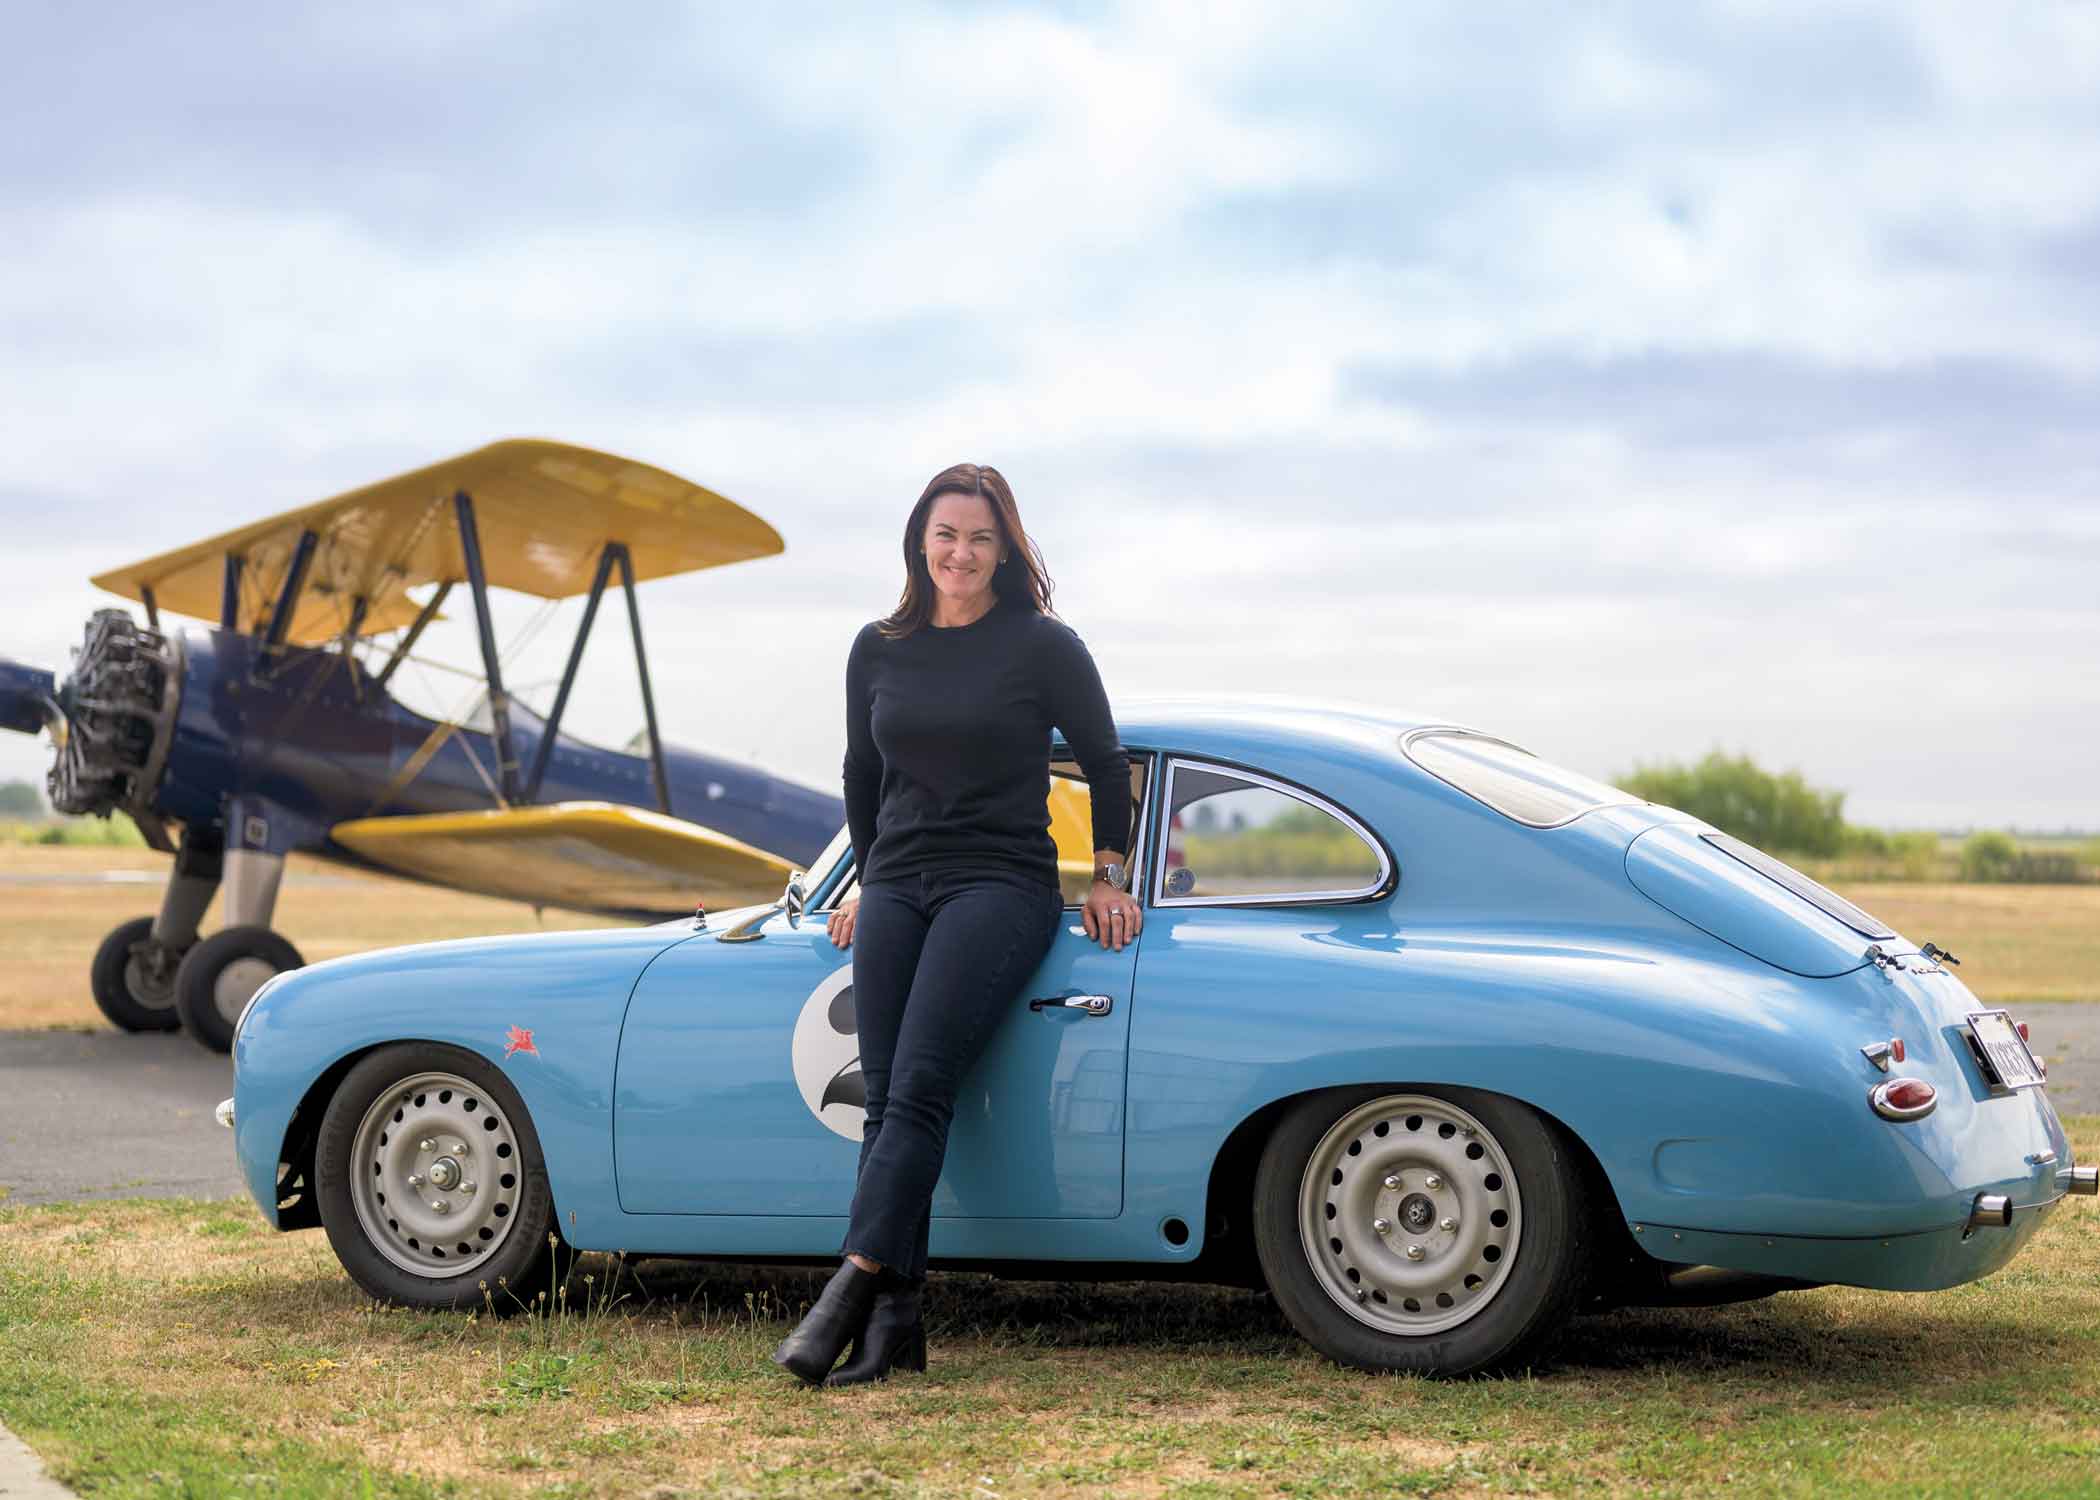 Shannon O'Shaugnessy leaning on a porsche with a plane in the background